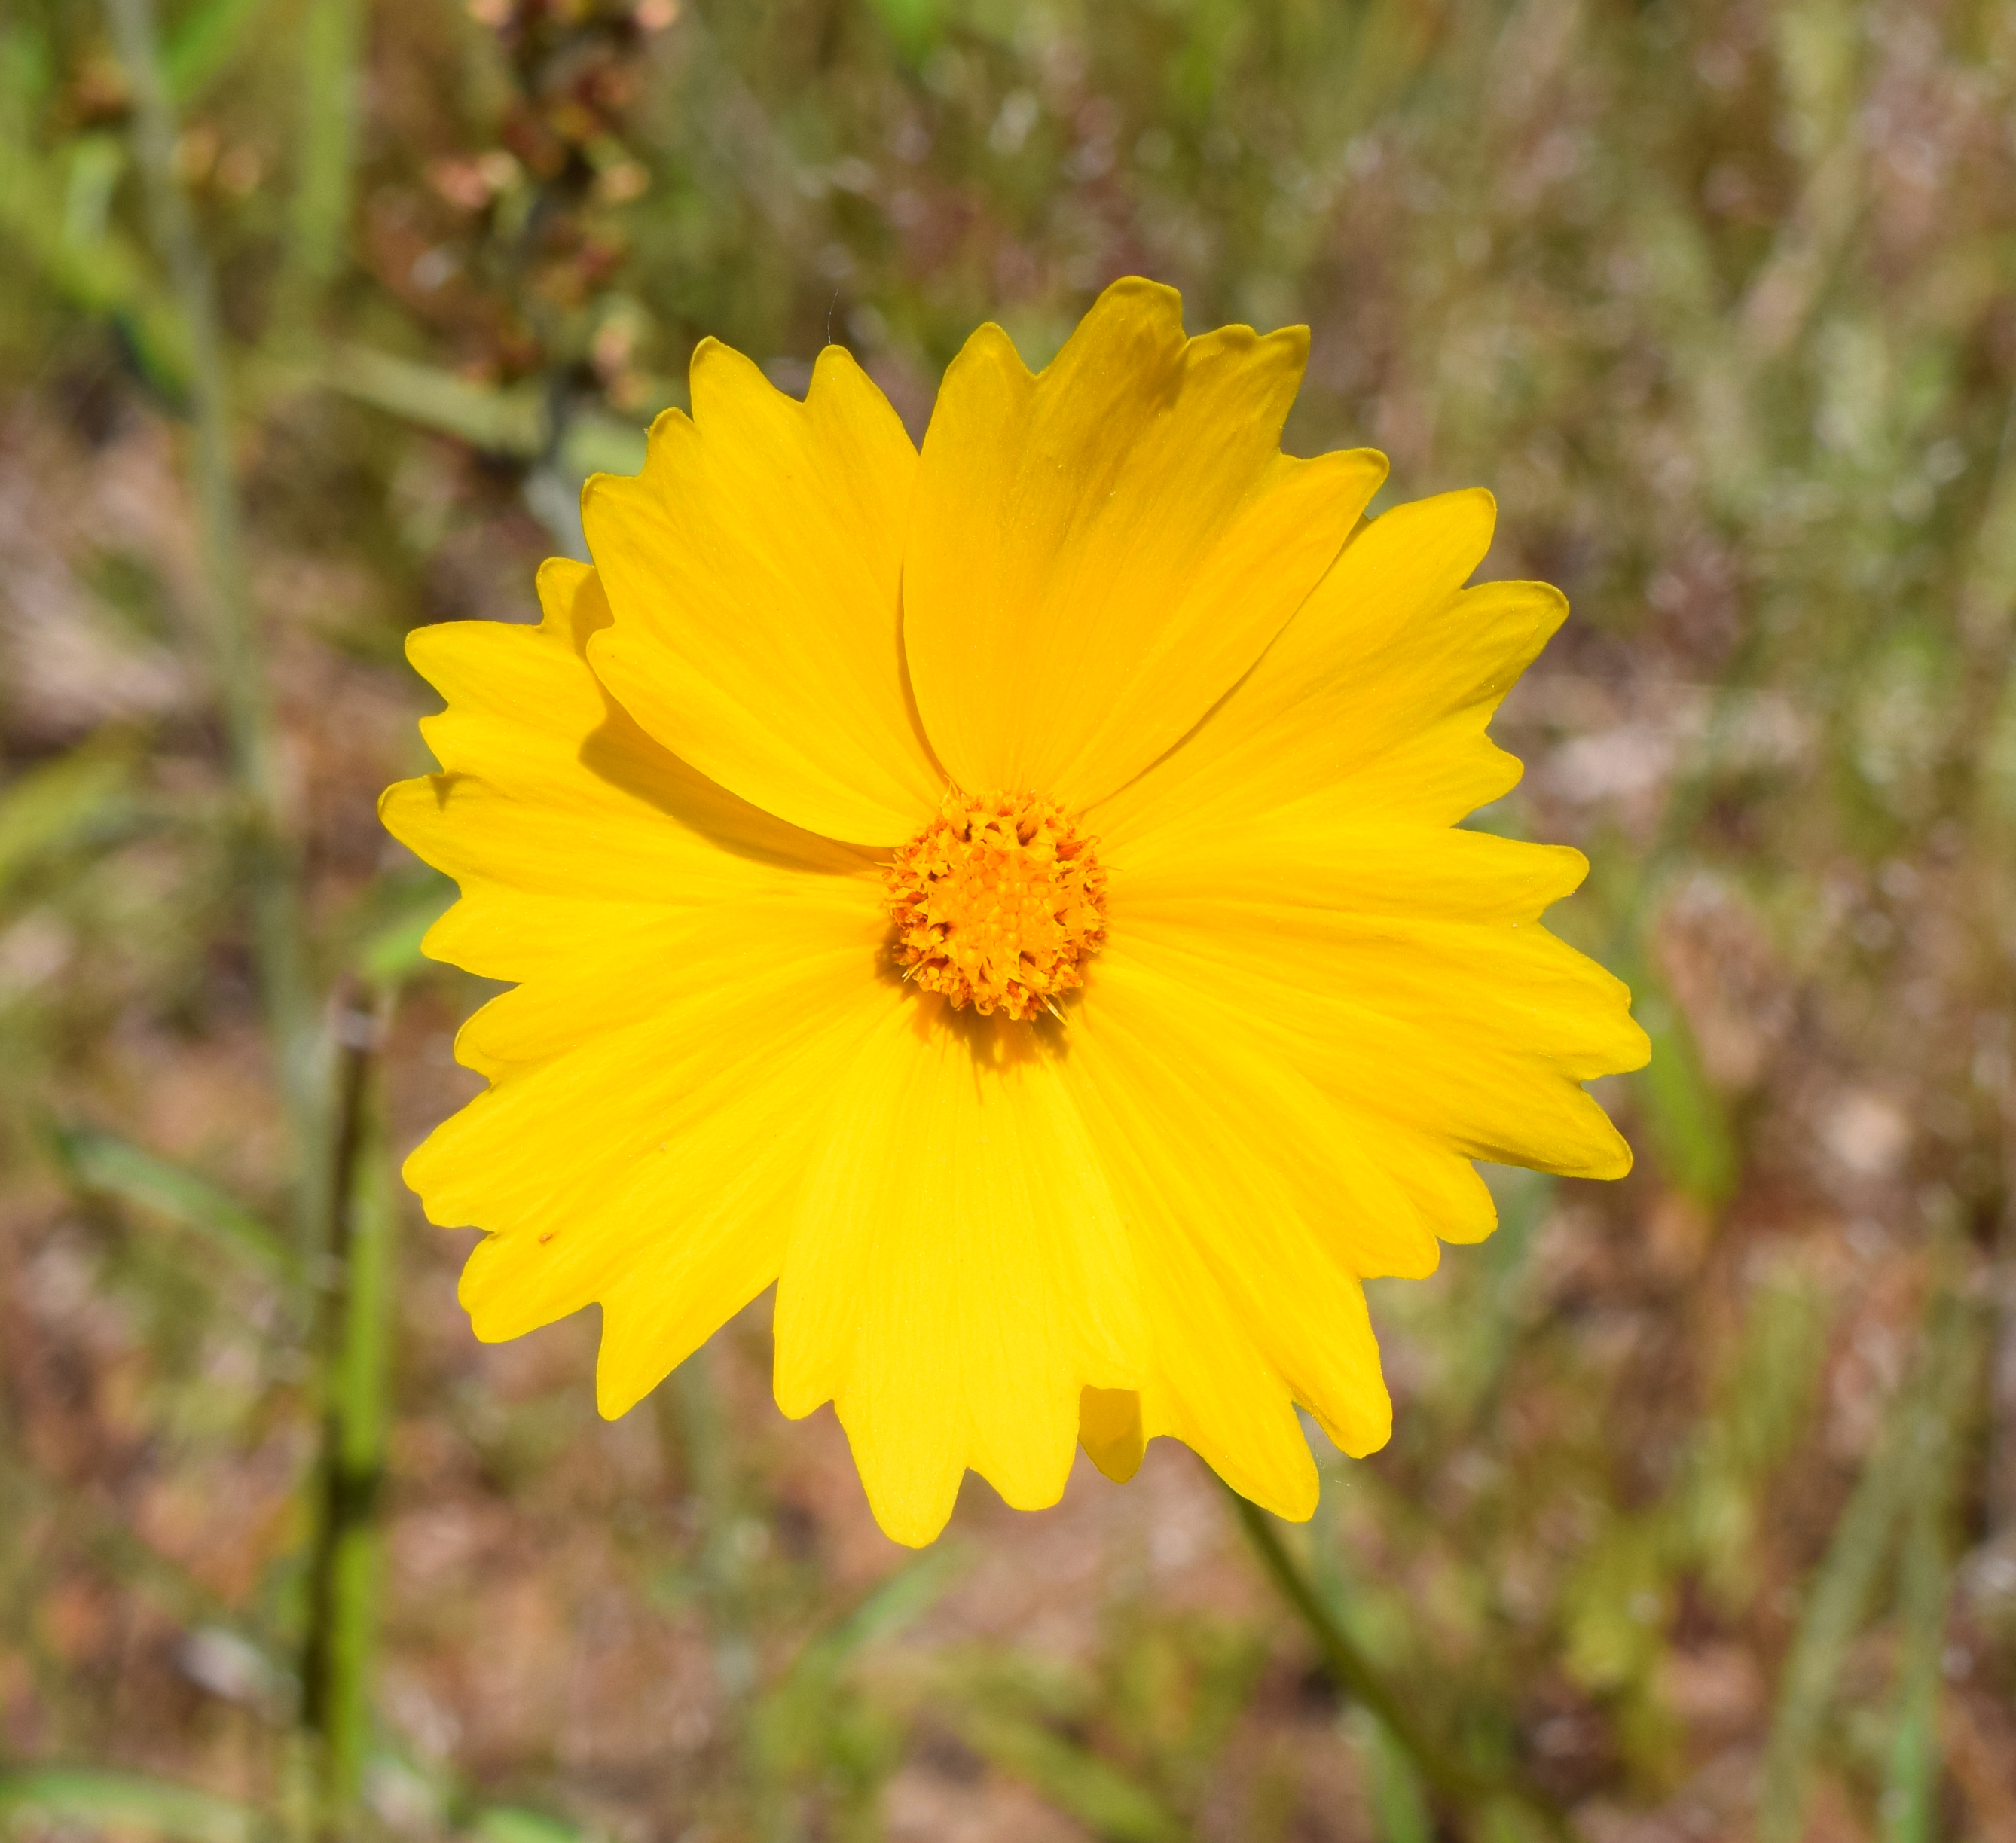 grounds-pollinators-flowers-Lance-Leaved-Coreopsis